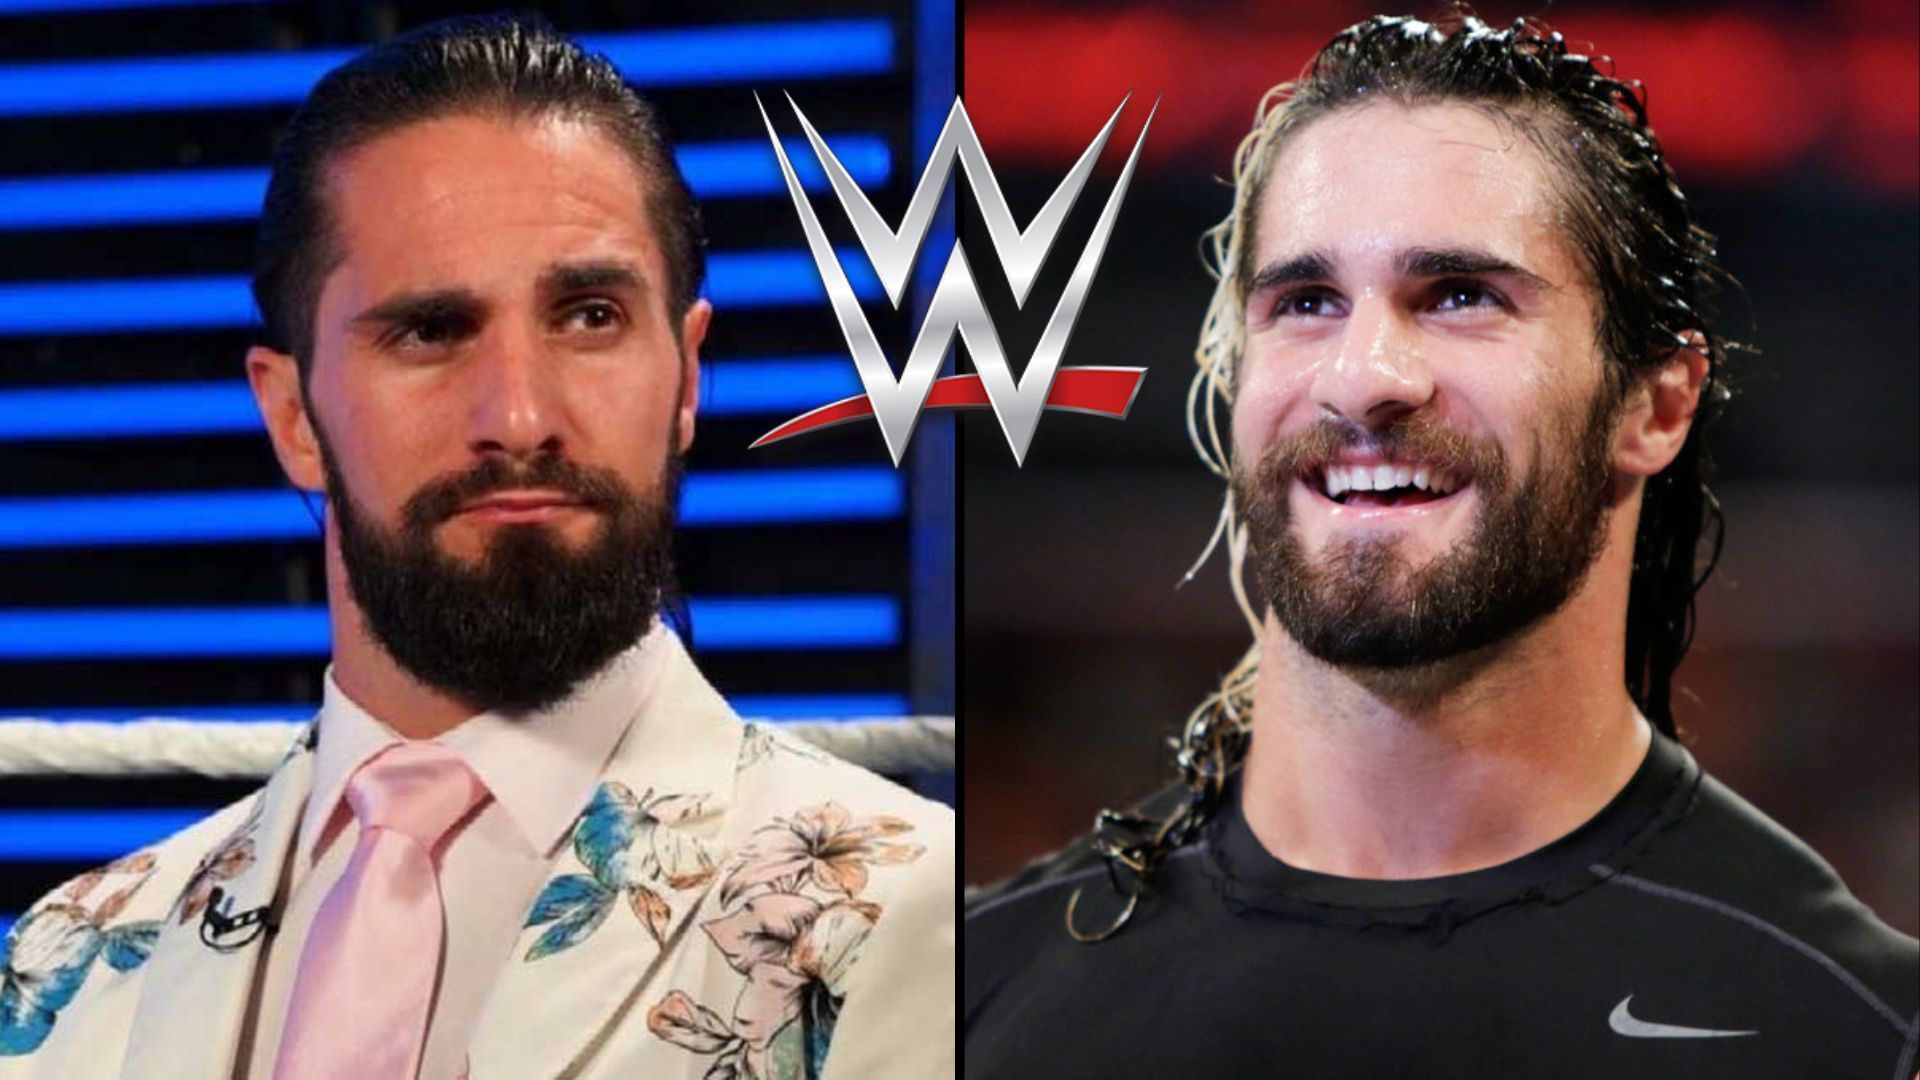 Seth Rollins is one of the pioneers of the new era in WWE